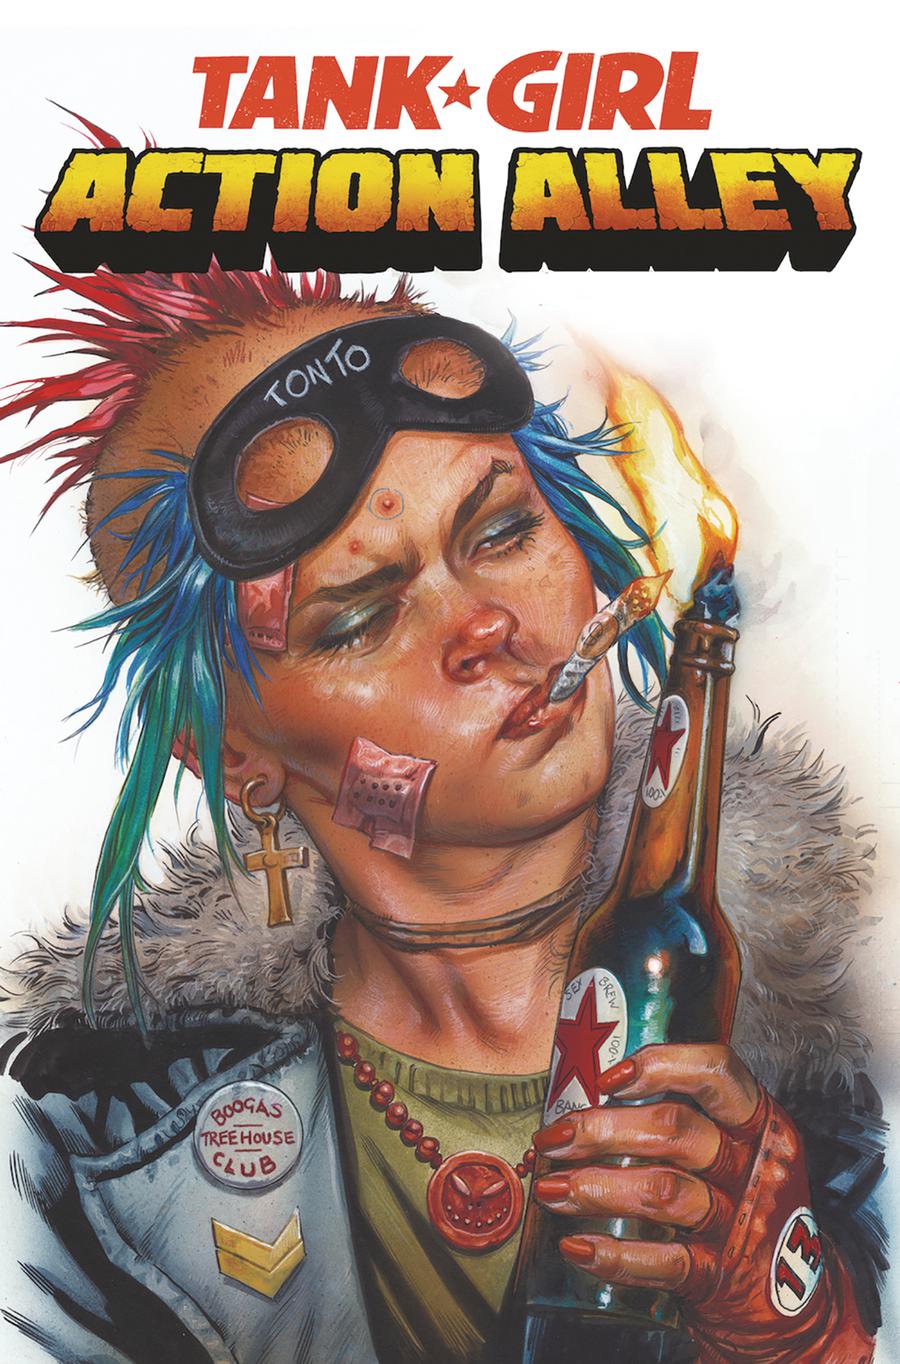 Tank Girl Vol 1 Action Alley TP